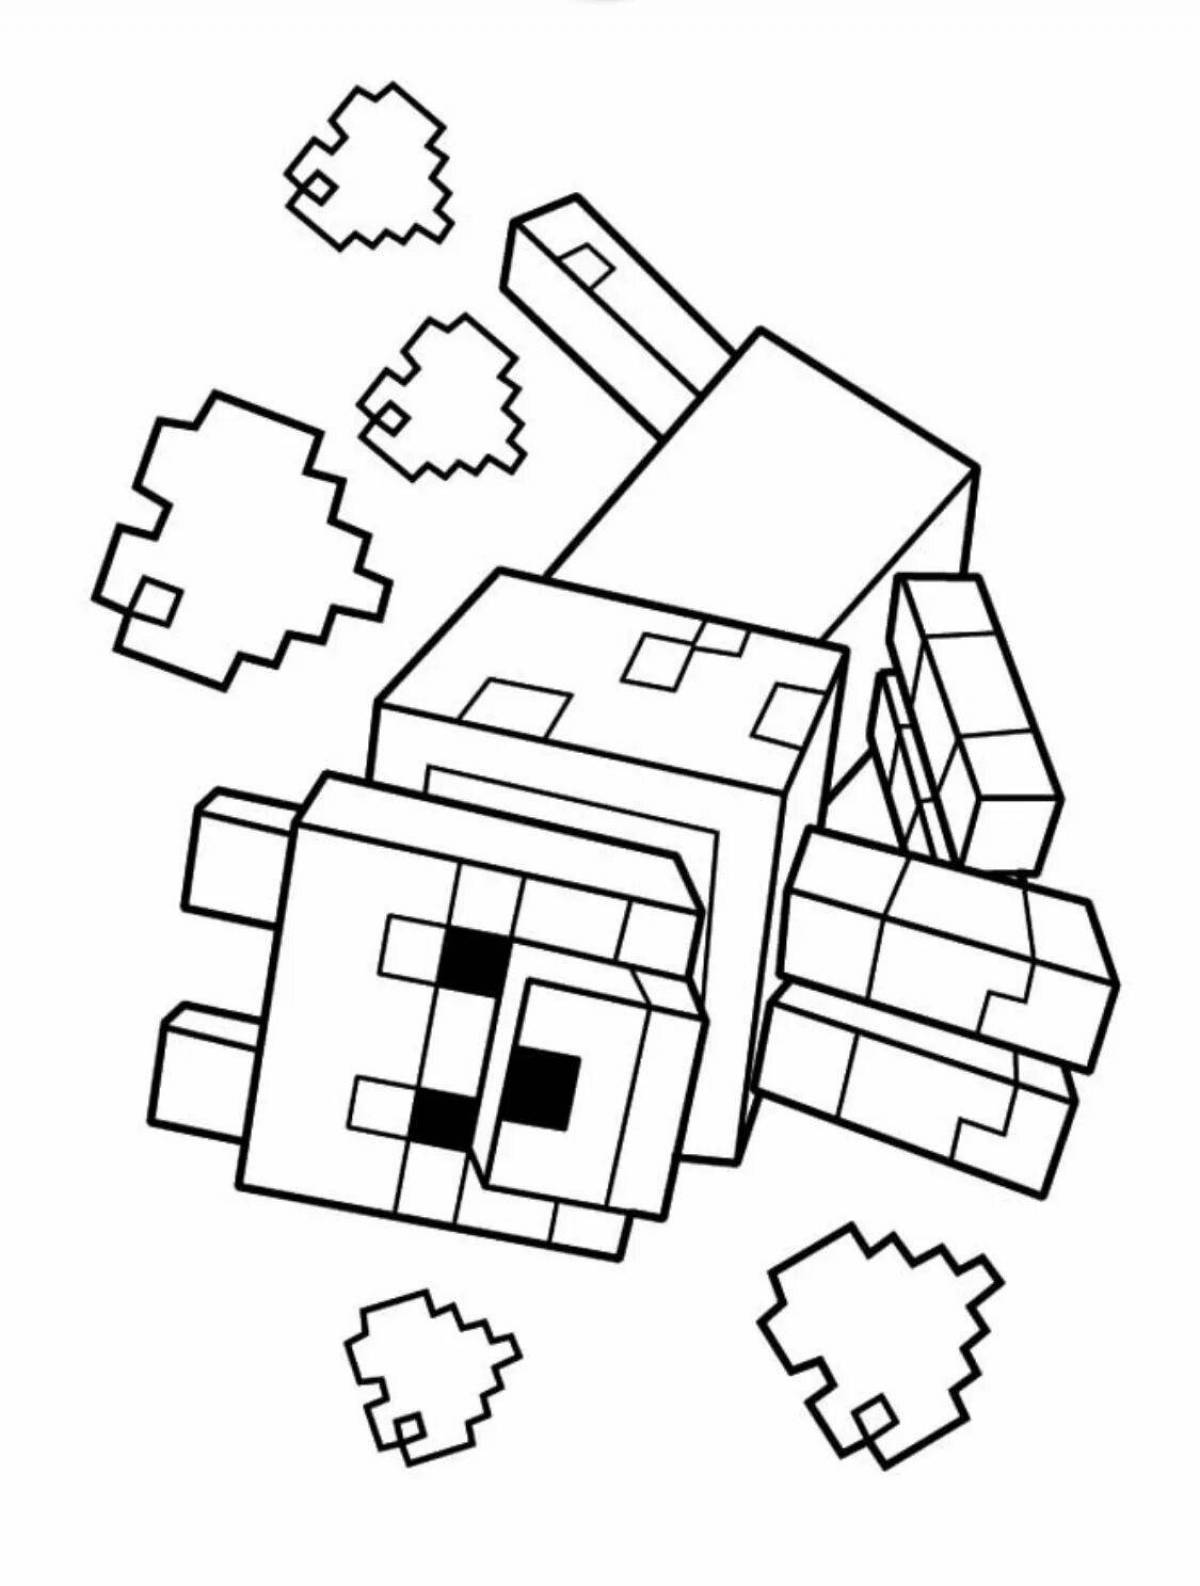 Dazzling minecraft cool coloring book for boys